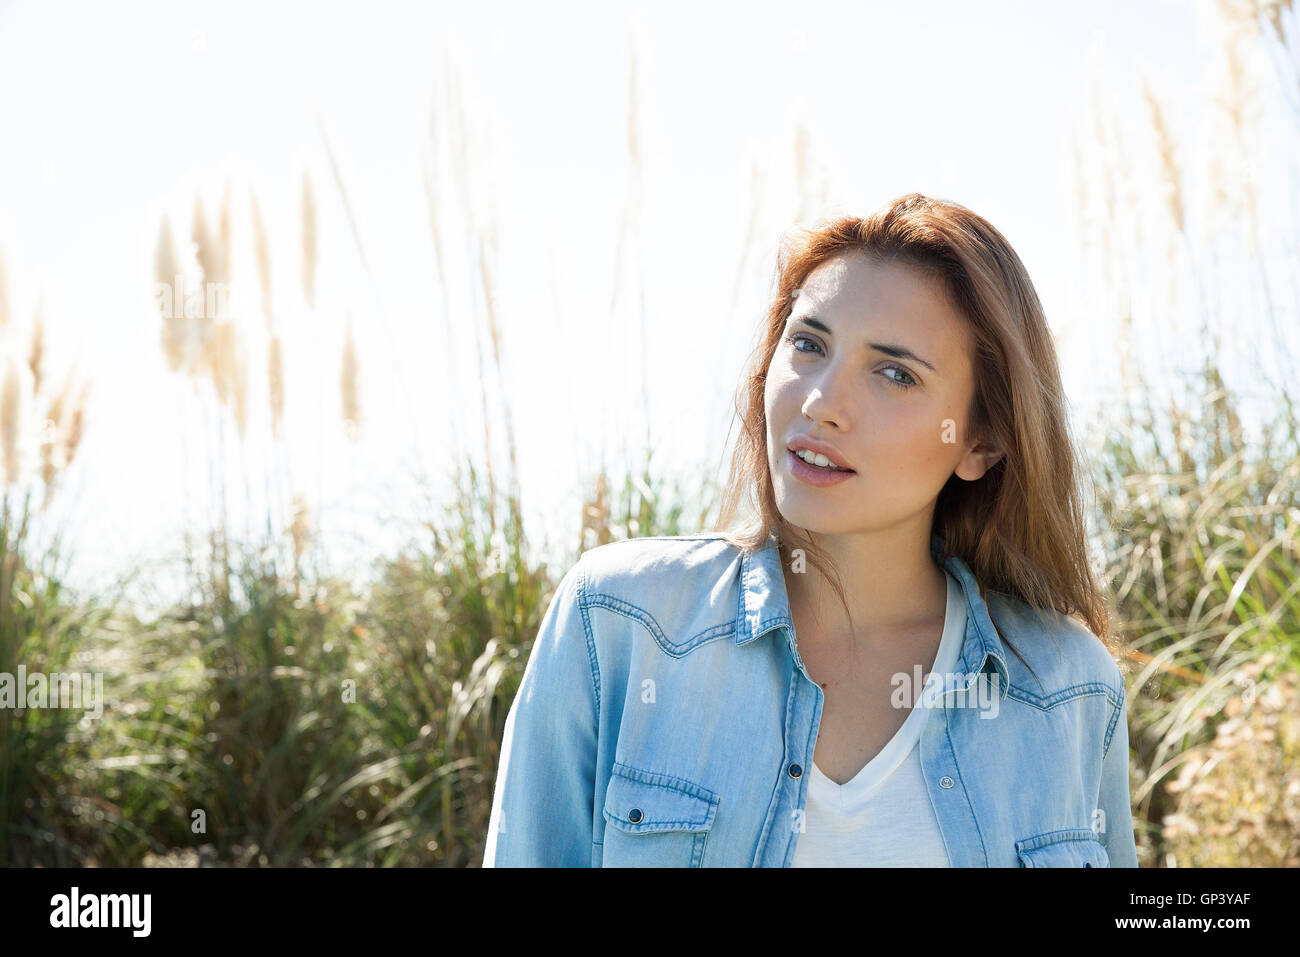 Young woman outdoors in nature, portrait Stock Photo